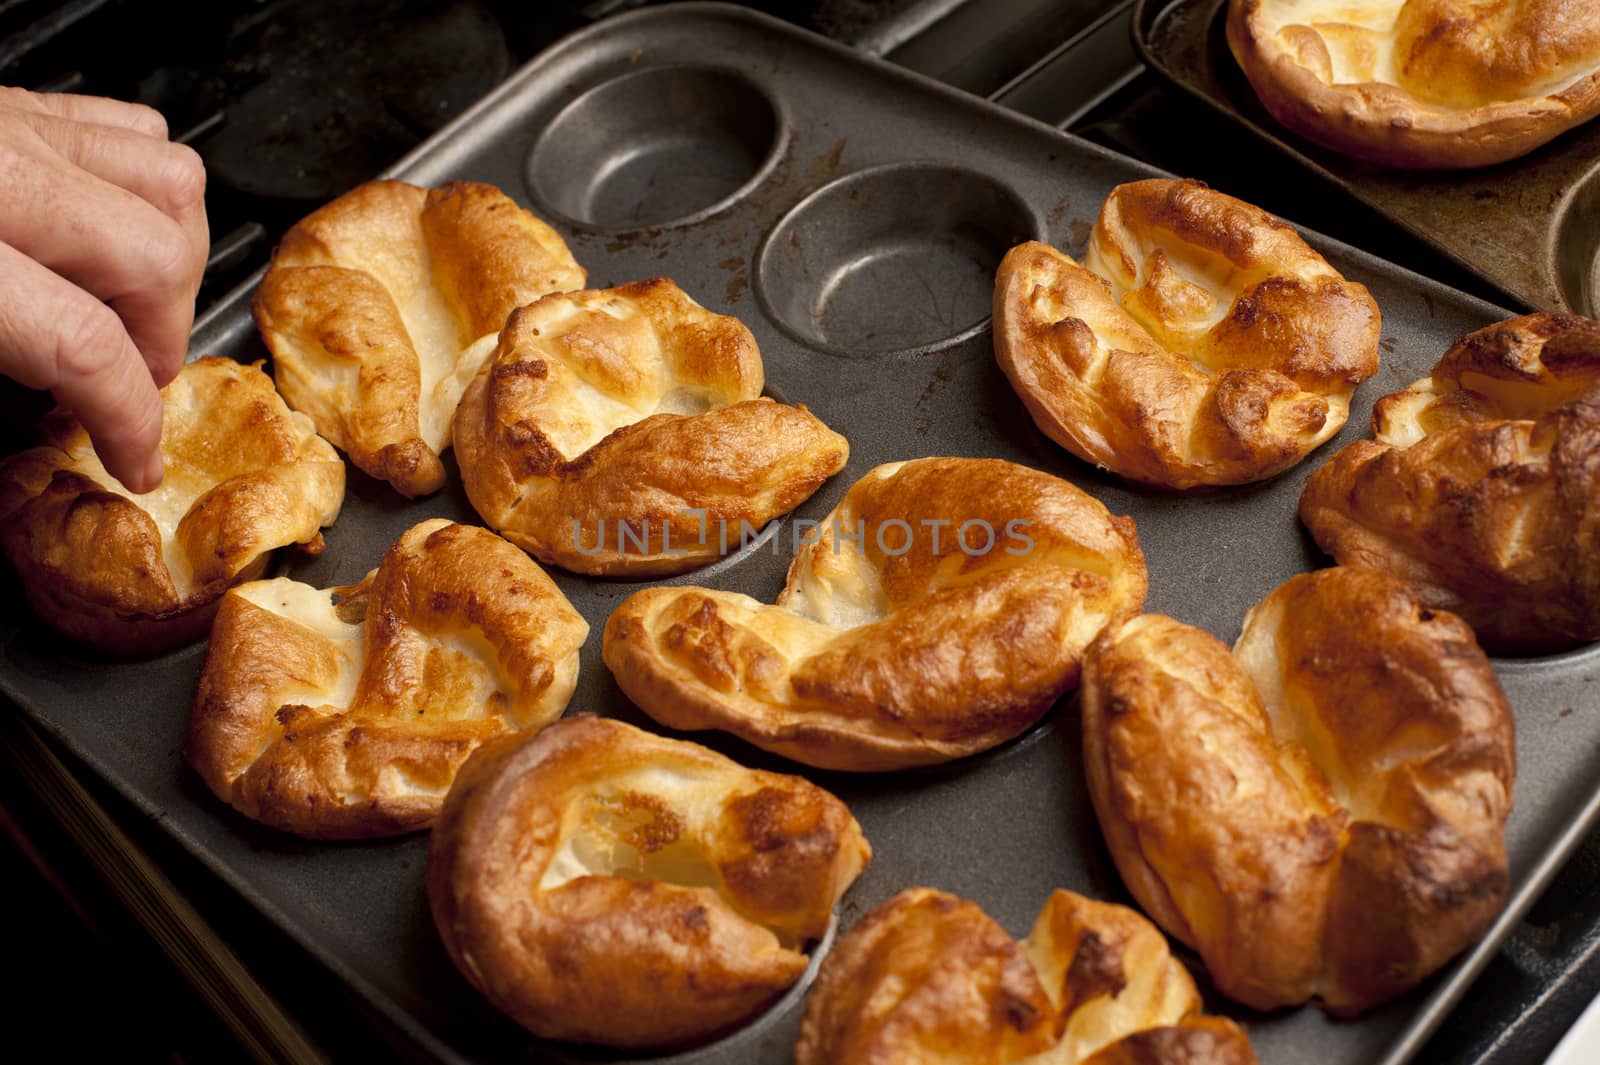 Man removing freshly baked individual fluffy golden Yorkshire puddings from a baking tray